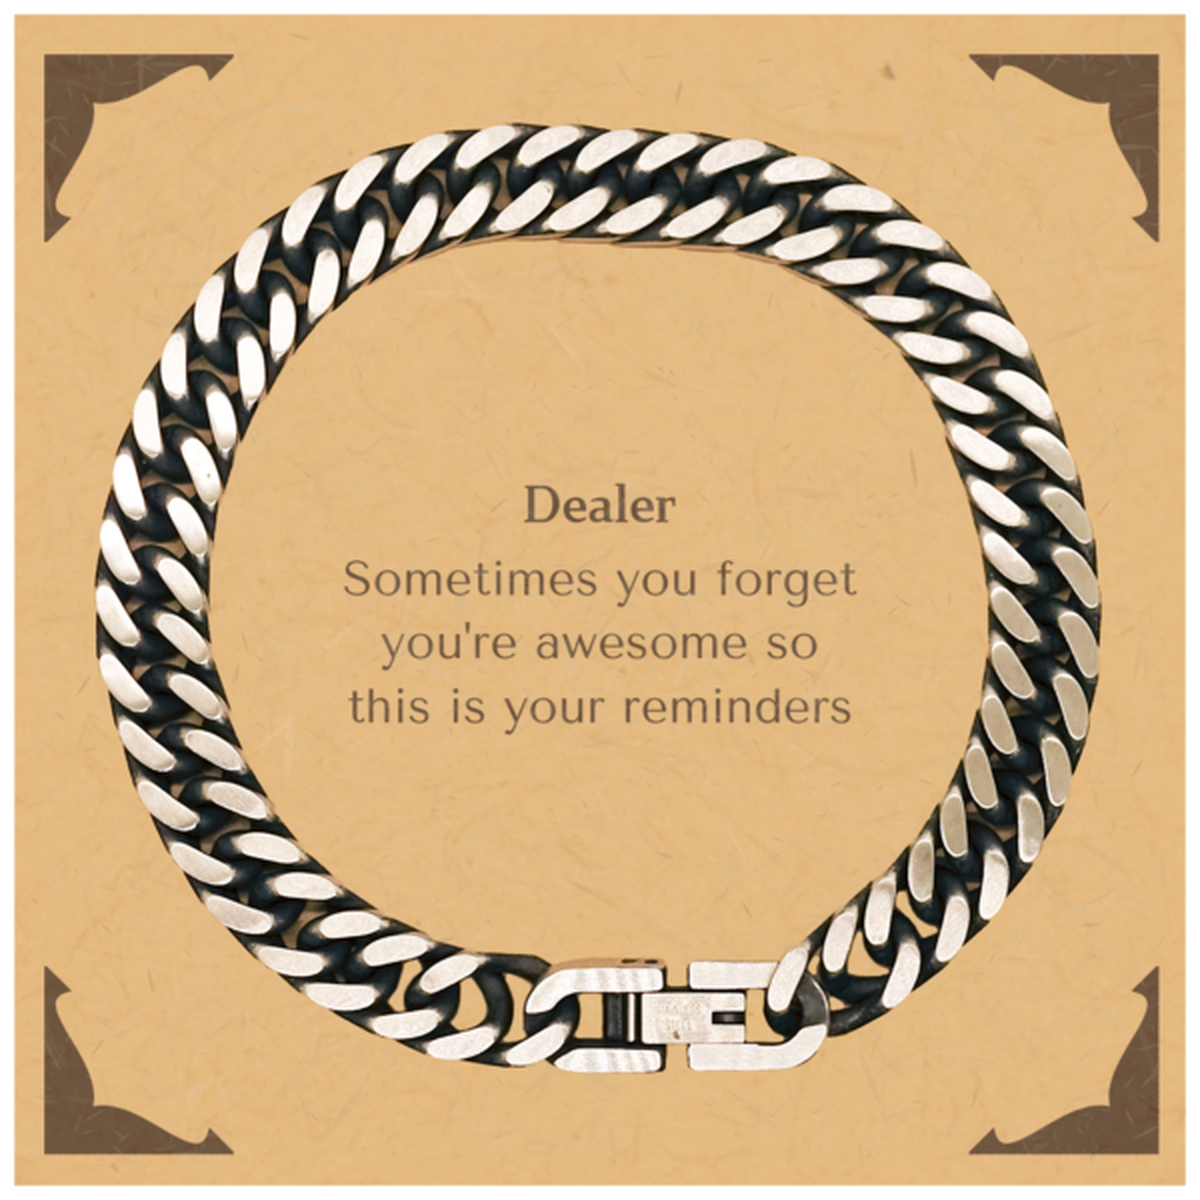 Sentimental Dealer Cuban Link Chain Bracelet, Dealer Sometimes you forget you're awesome so this is your reminders, Graduation Christmas Birthday Gifts for Dealer, Men, Women, Coworkers